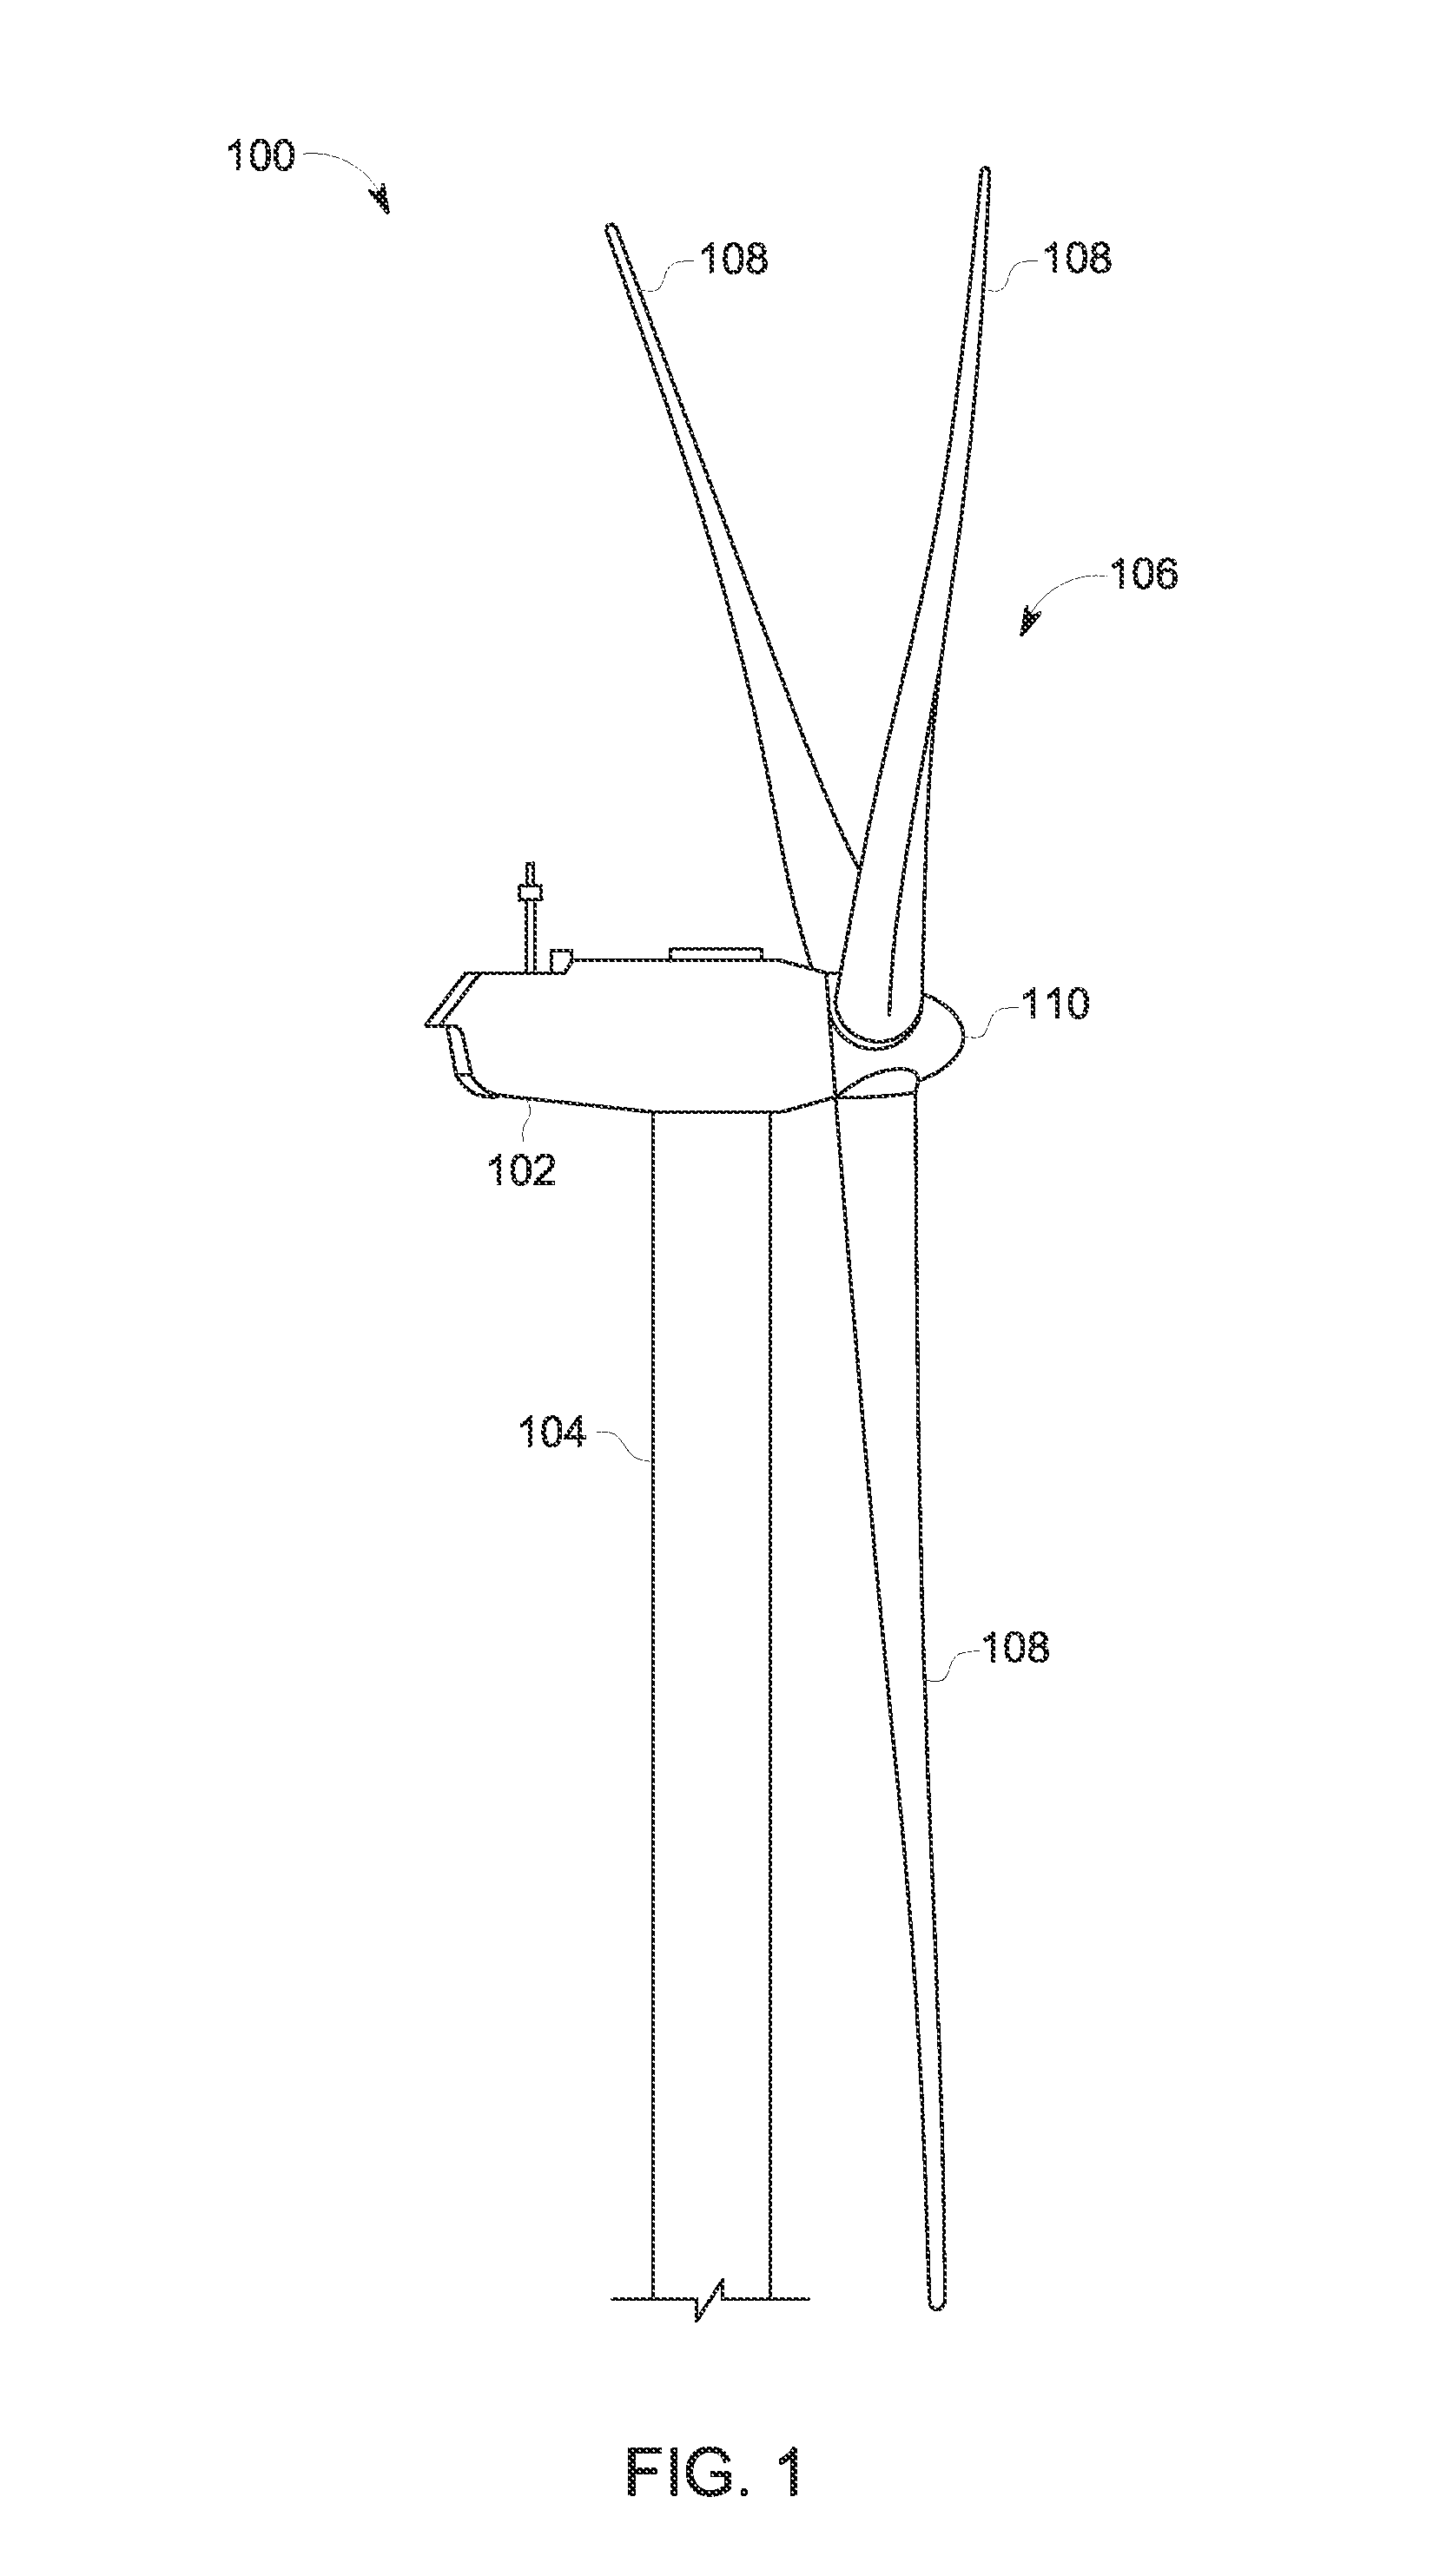 Root assemblies with external structural connection supports for rotor blades